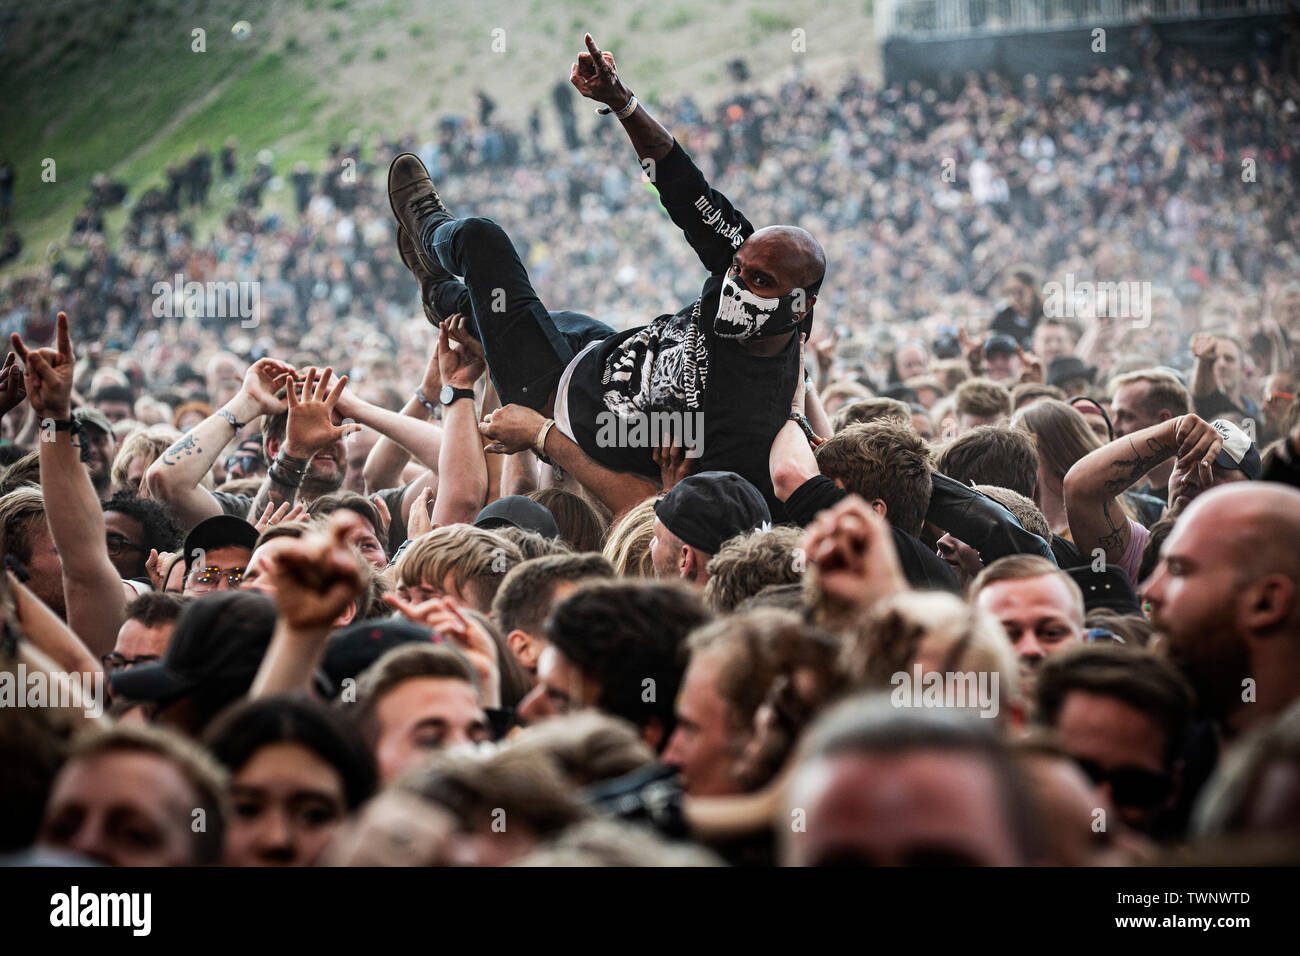 Copenhagen, Denmark. 21st June, 2019. Copenhagen, Denmark - June 21st,  2019. Heavy metal fans crowd surf at a live concert with the the American heavy  metal band Lamb of God during the